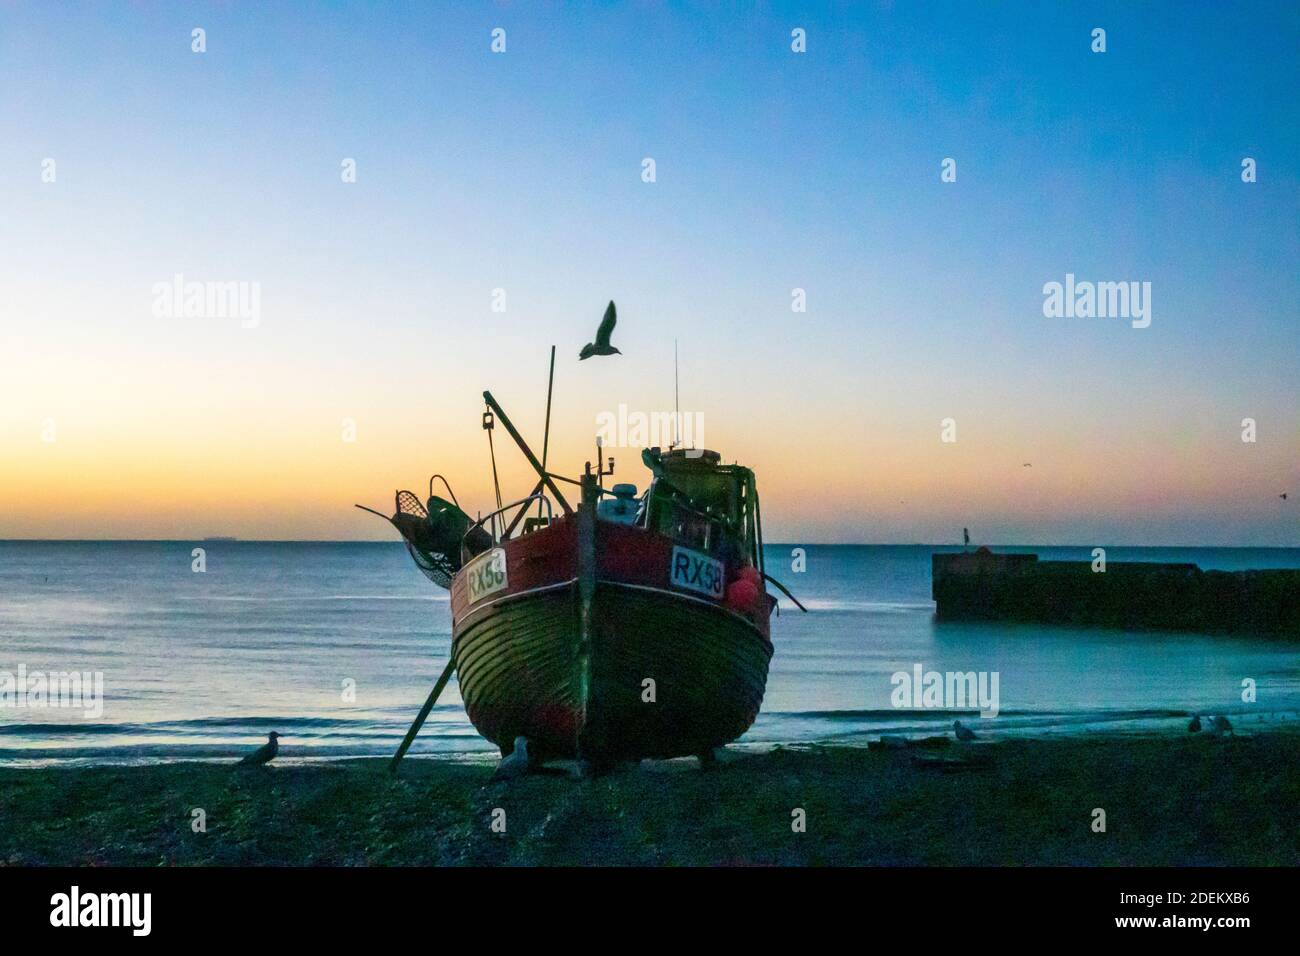 Hastings, East Sussex, UK. 1st December 2020. Hastings fishing boat at dawn on a sunny day on the Old Town Stade fishermen's beach. Carolyn Clarke/Alamy Live News Stock Photo